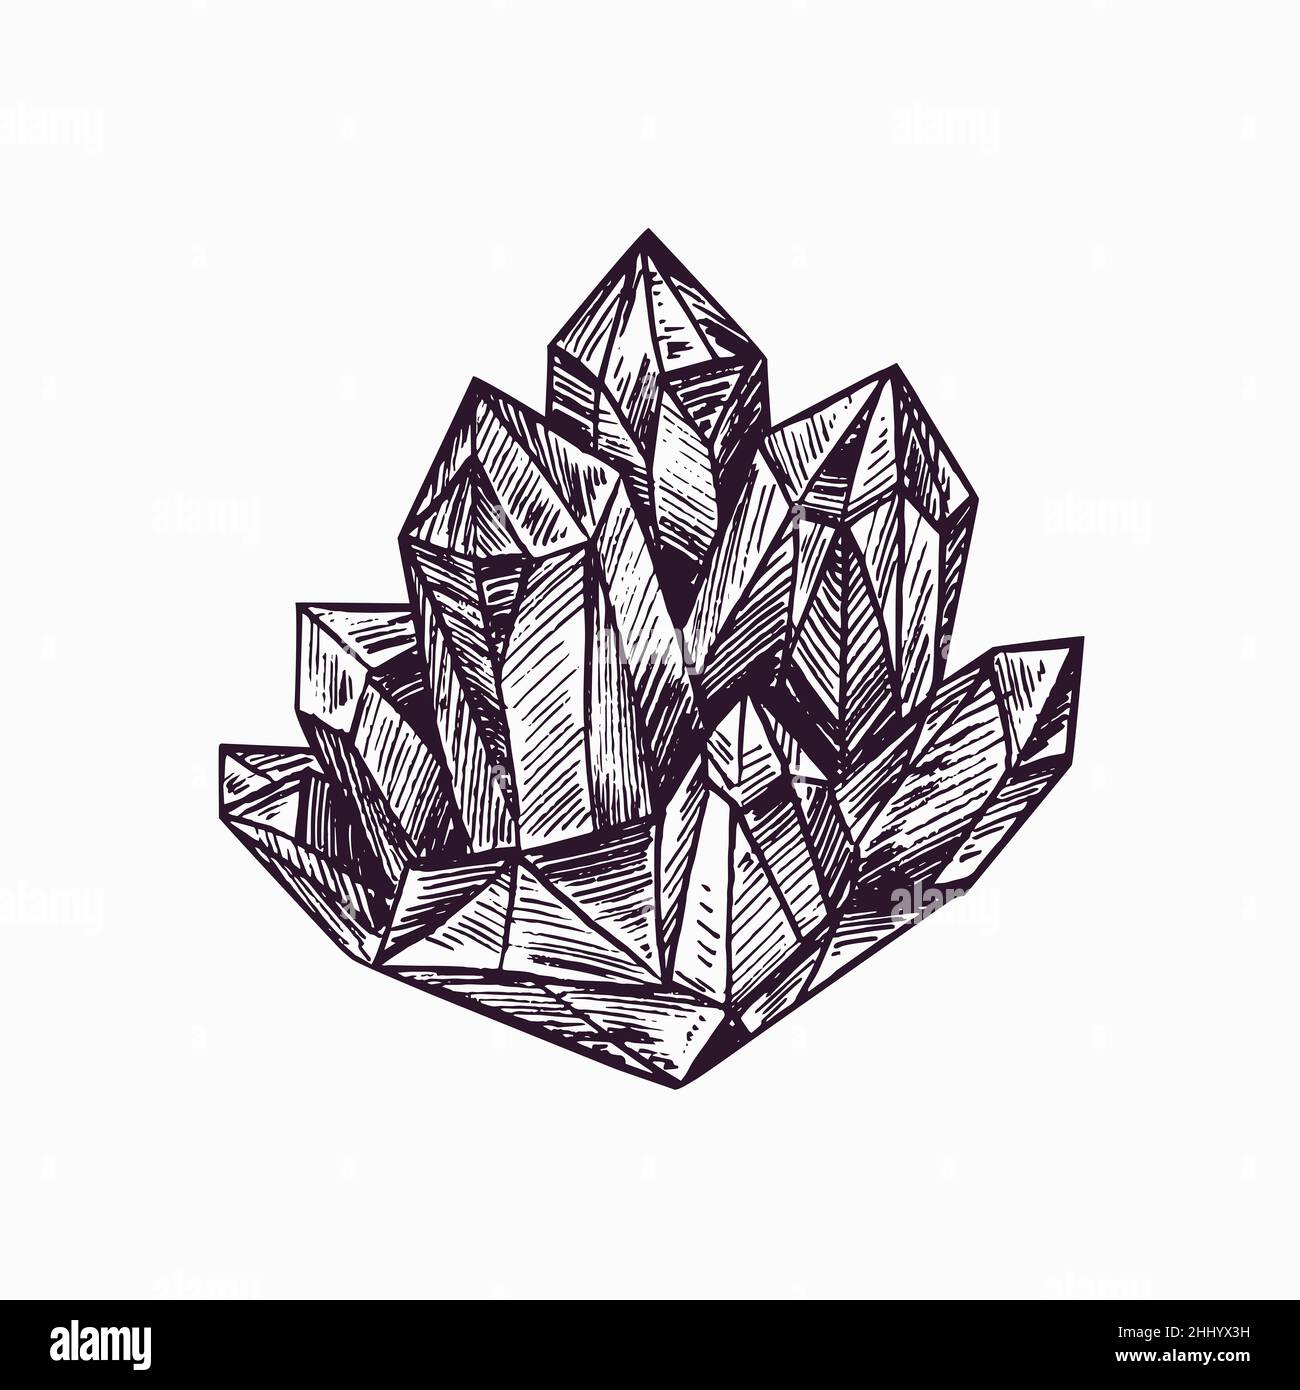 Beautiful crystal, simple doodle ink drawing, gravure style Stock Photo